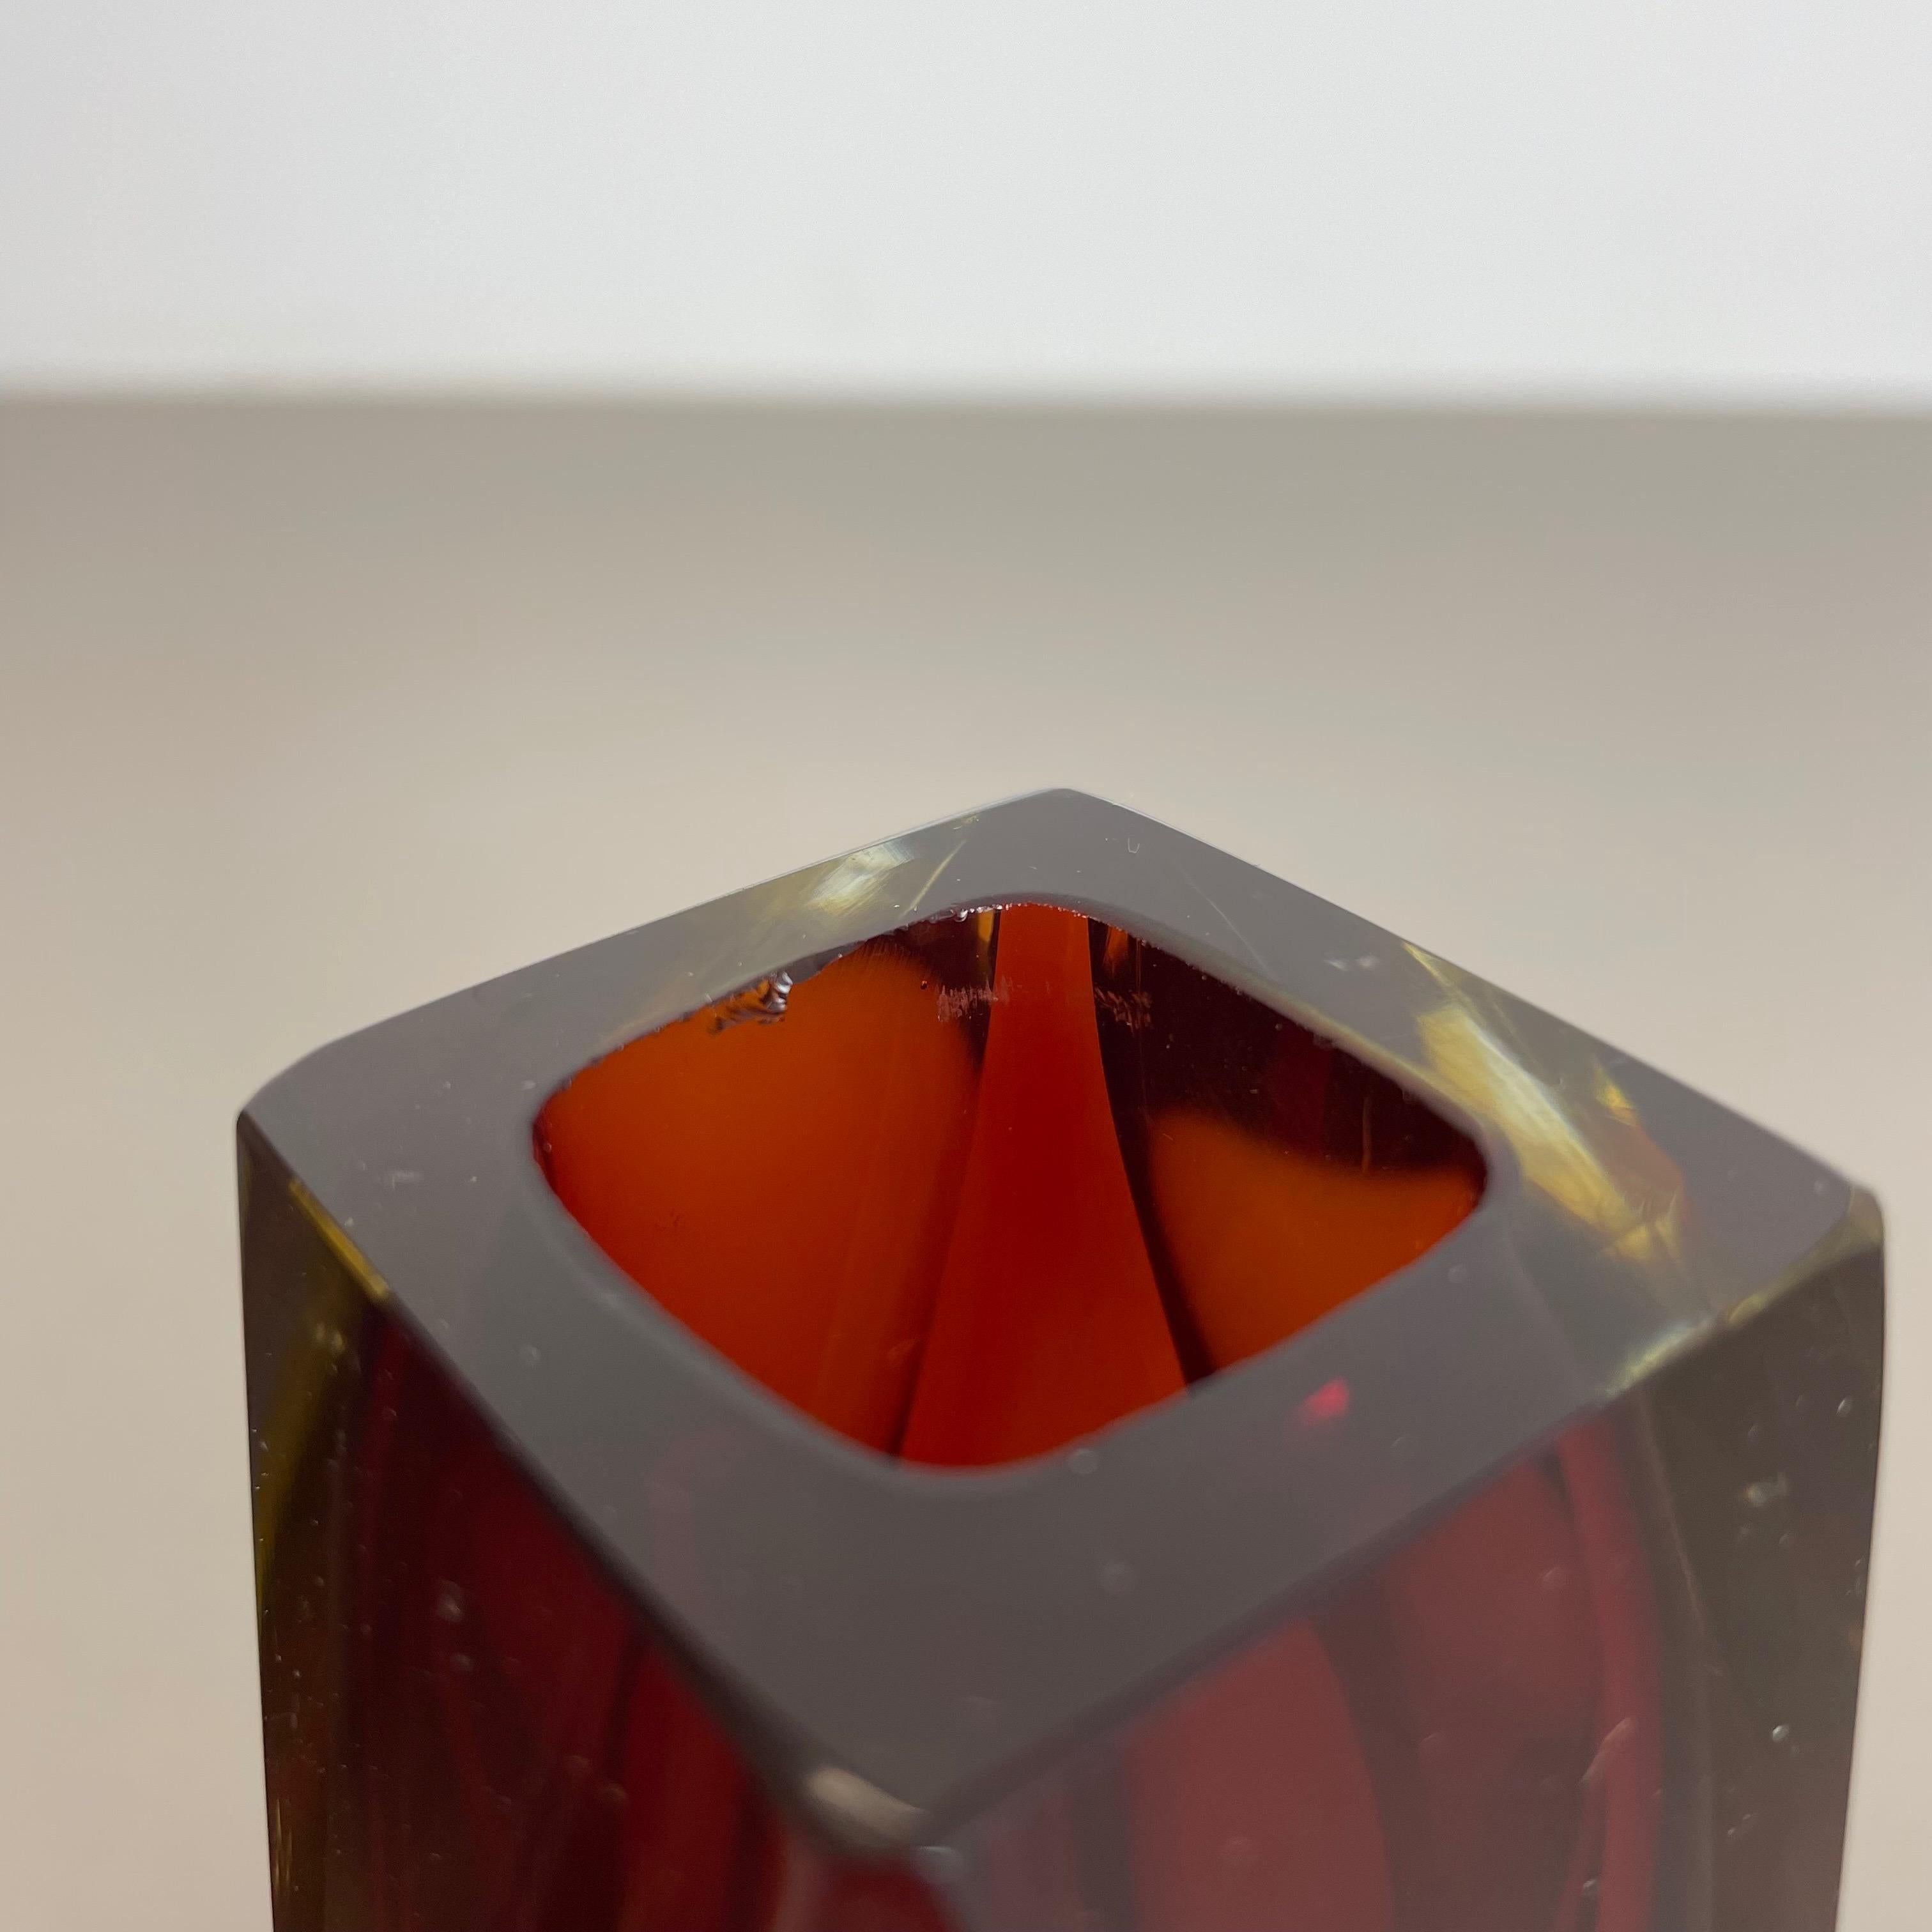 Set of 2 Faceted Murano Glass Sommerso Vase Designed by Flavio Poli Italy, 1970s For Sale 6